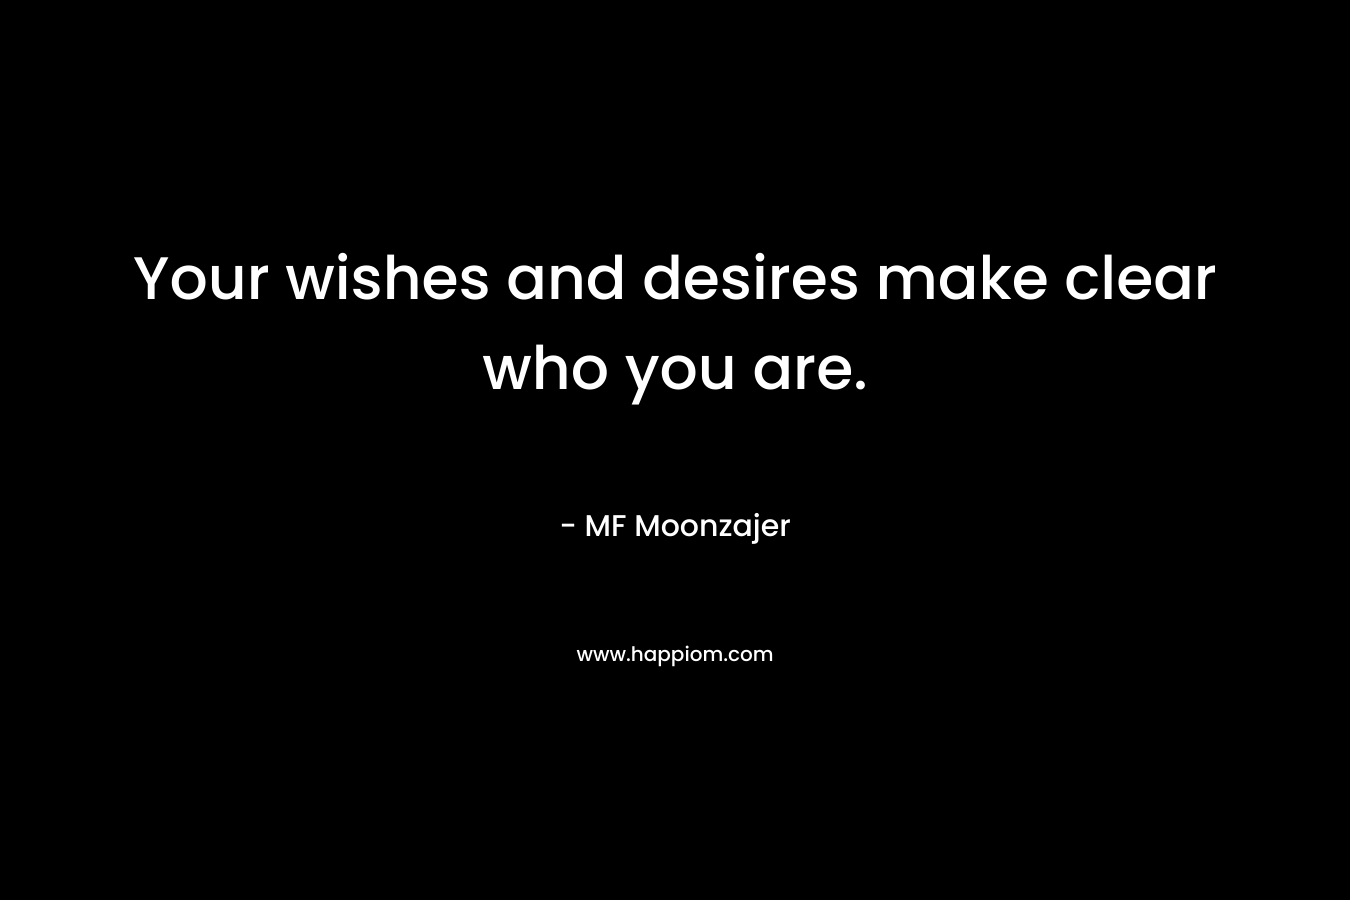 Your wishes and desires make clear who you are. – MF Moonzajer